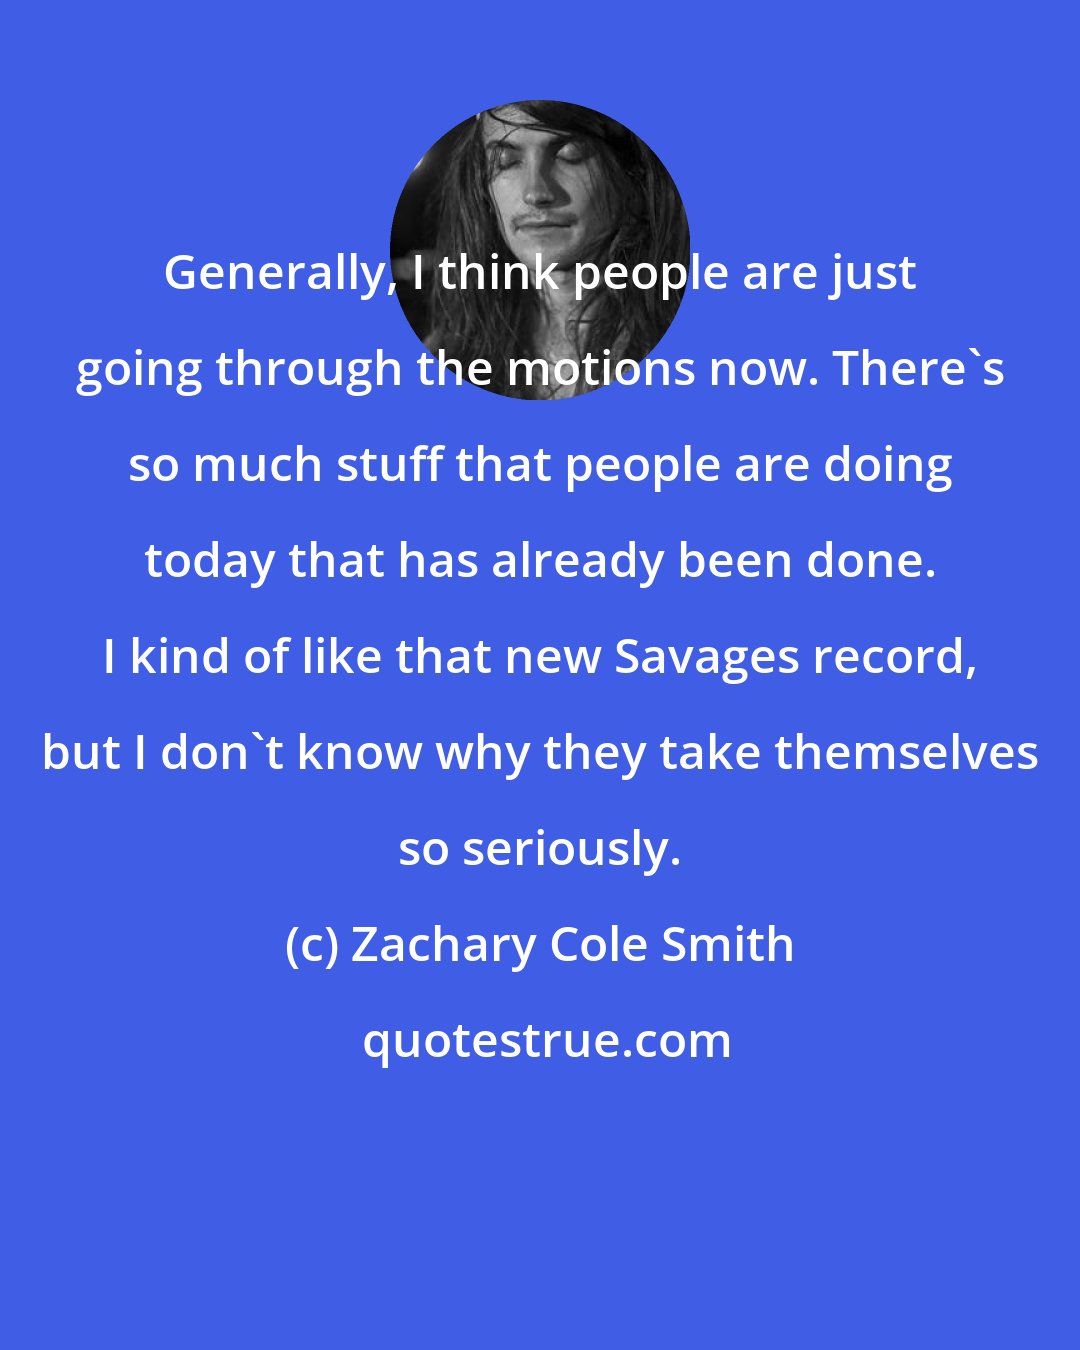 Zachary Cole Smith: Generally, I think people are just going through the motions now. There's so much stuff that people are doing today that has already been done. I kind of like that new Savages record, but I don't know why they take themselves so seriously.